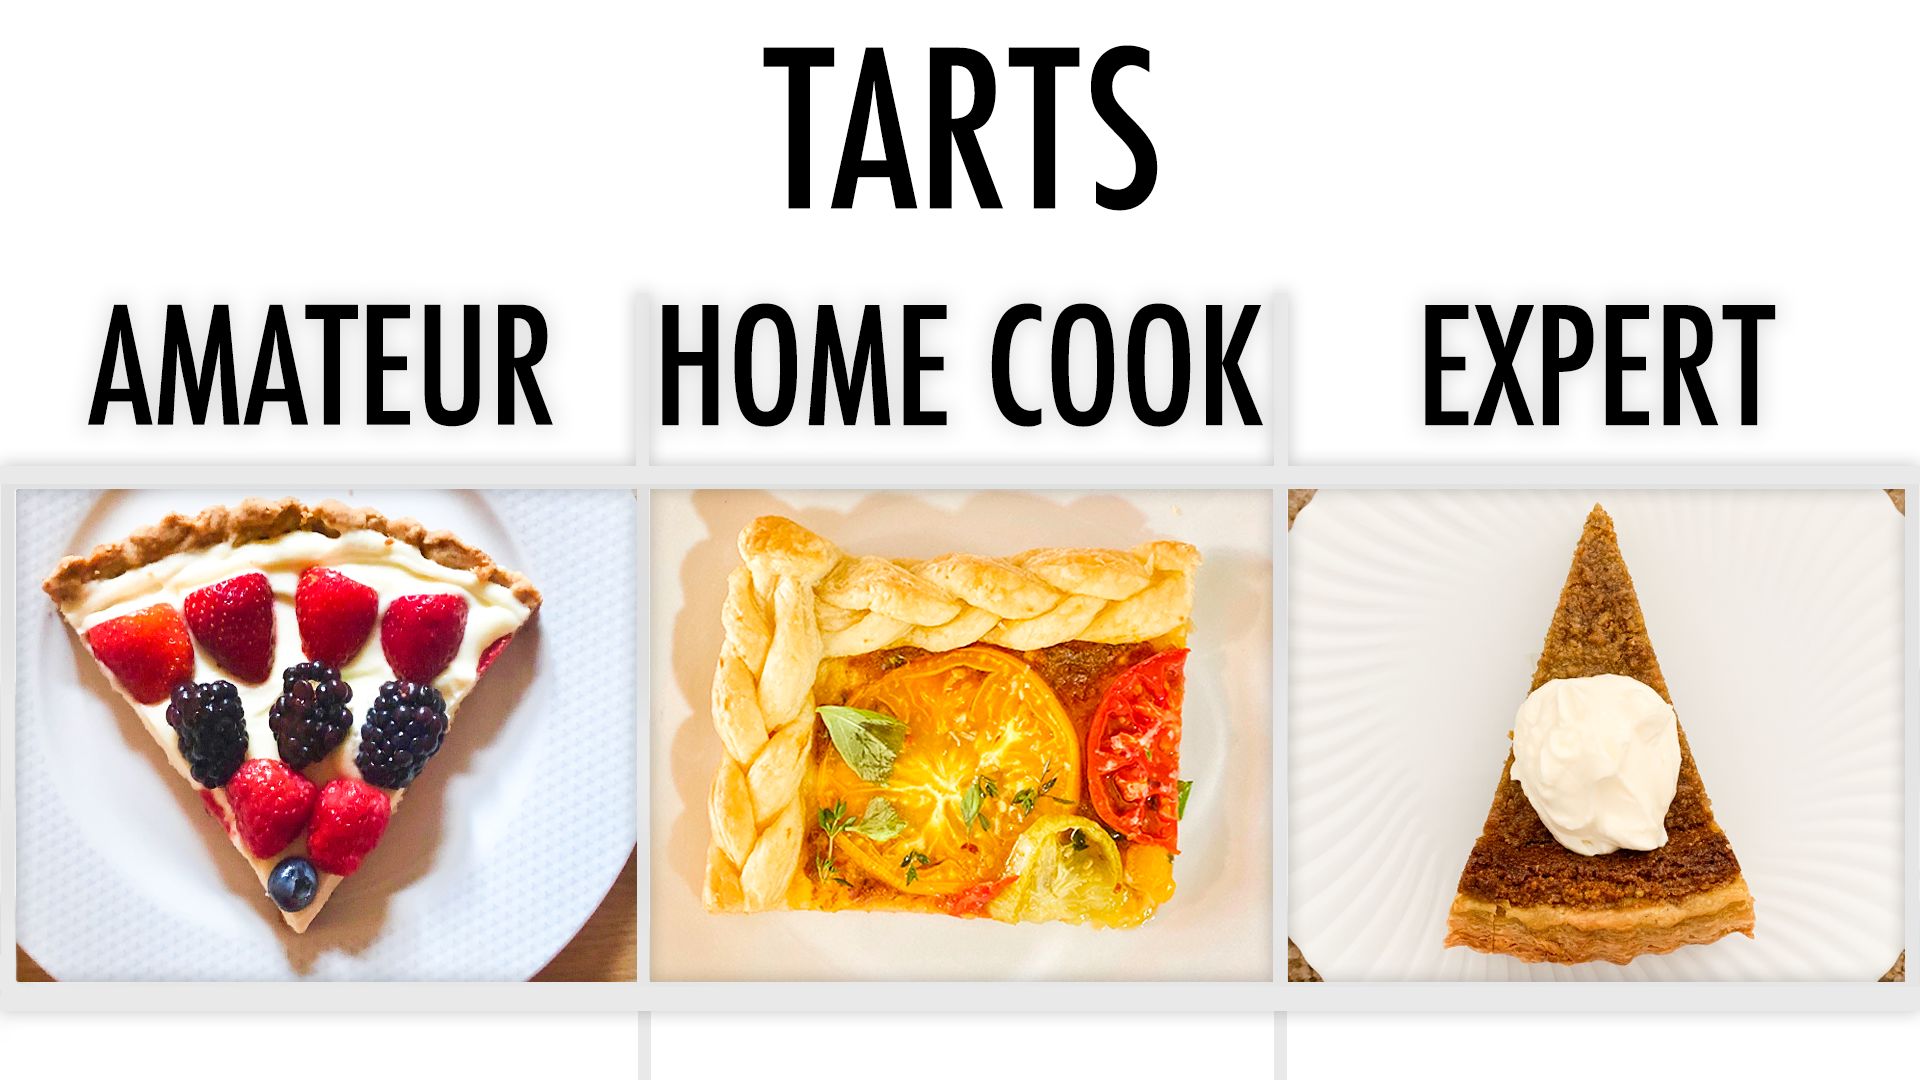 Watch 4 Levels Of Tarts Amateur To Food Scientist 4 Levels Epicurious